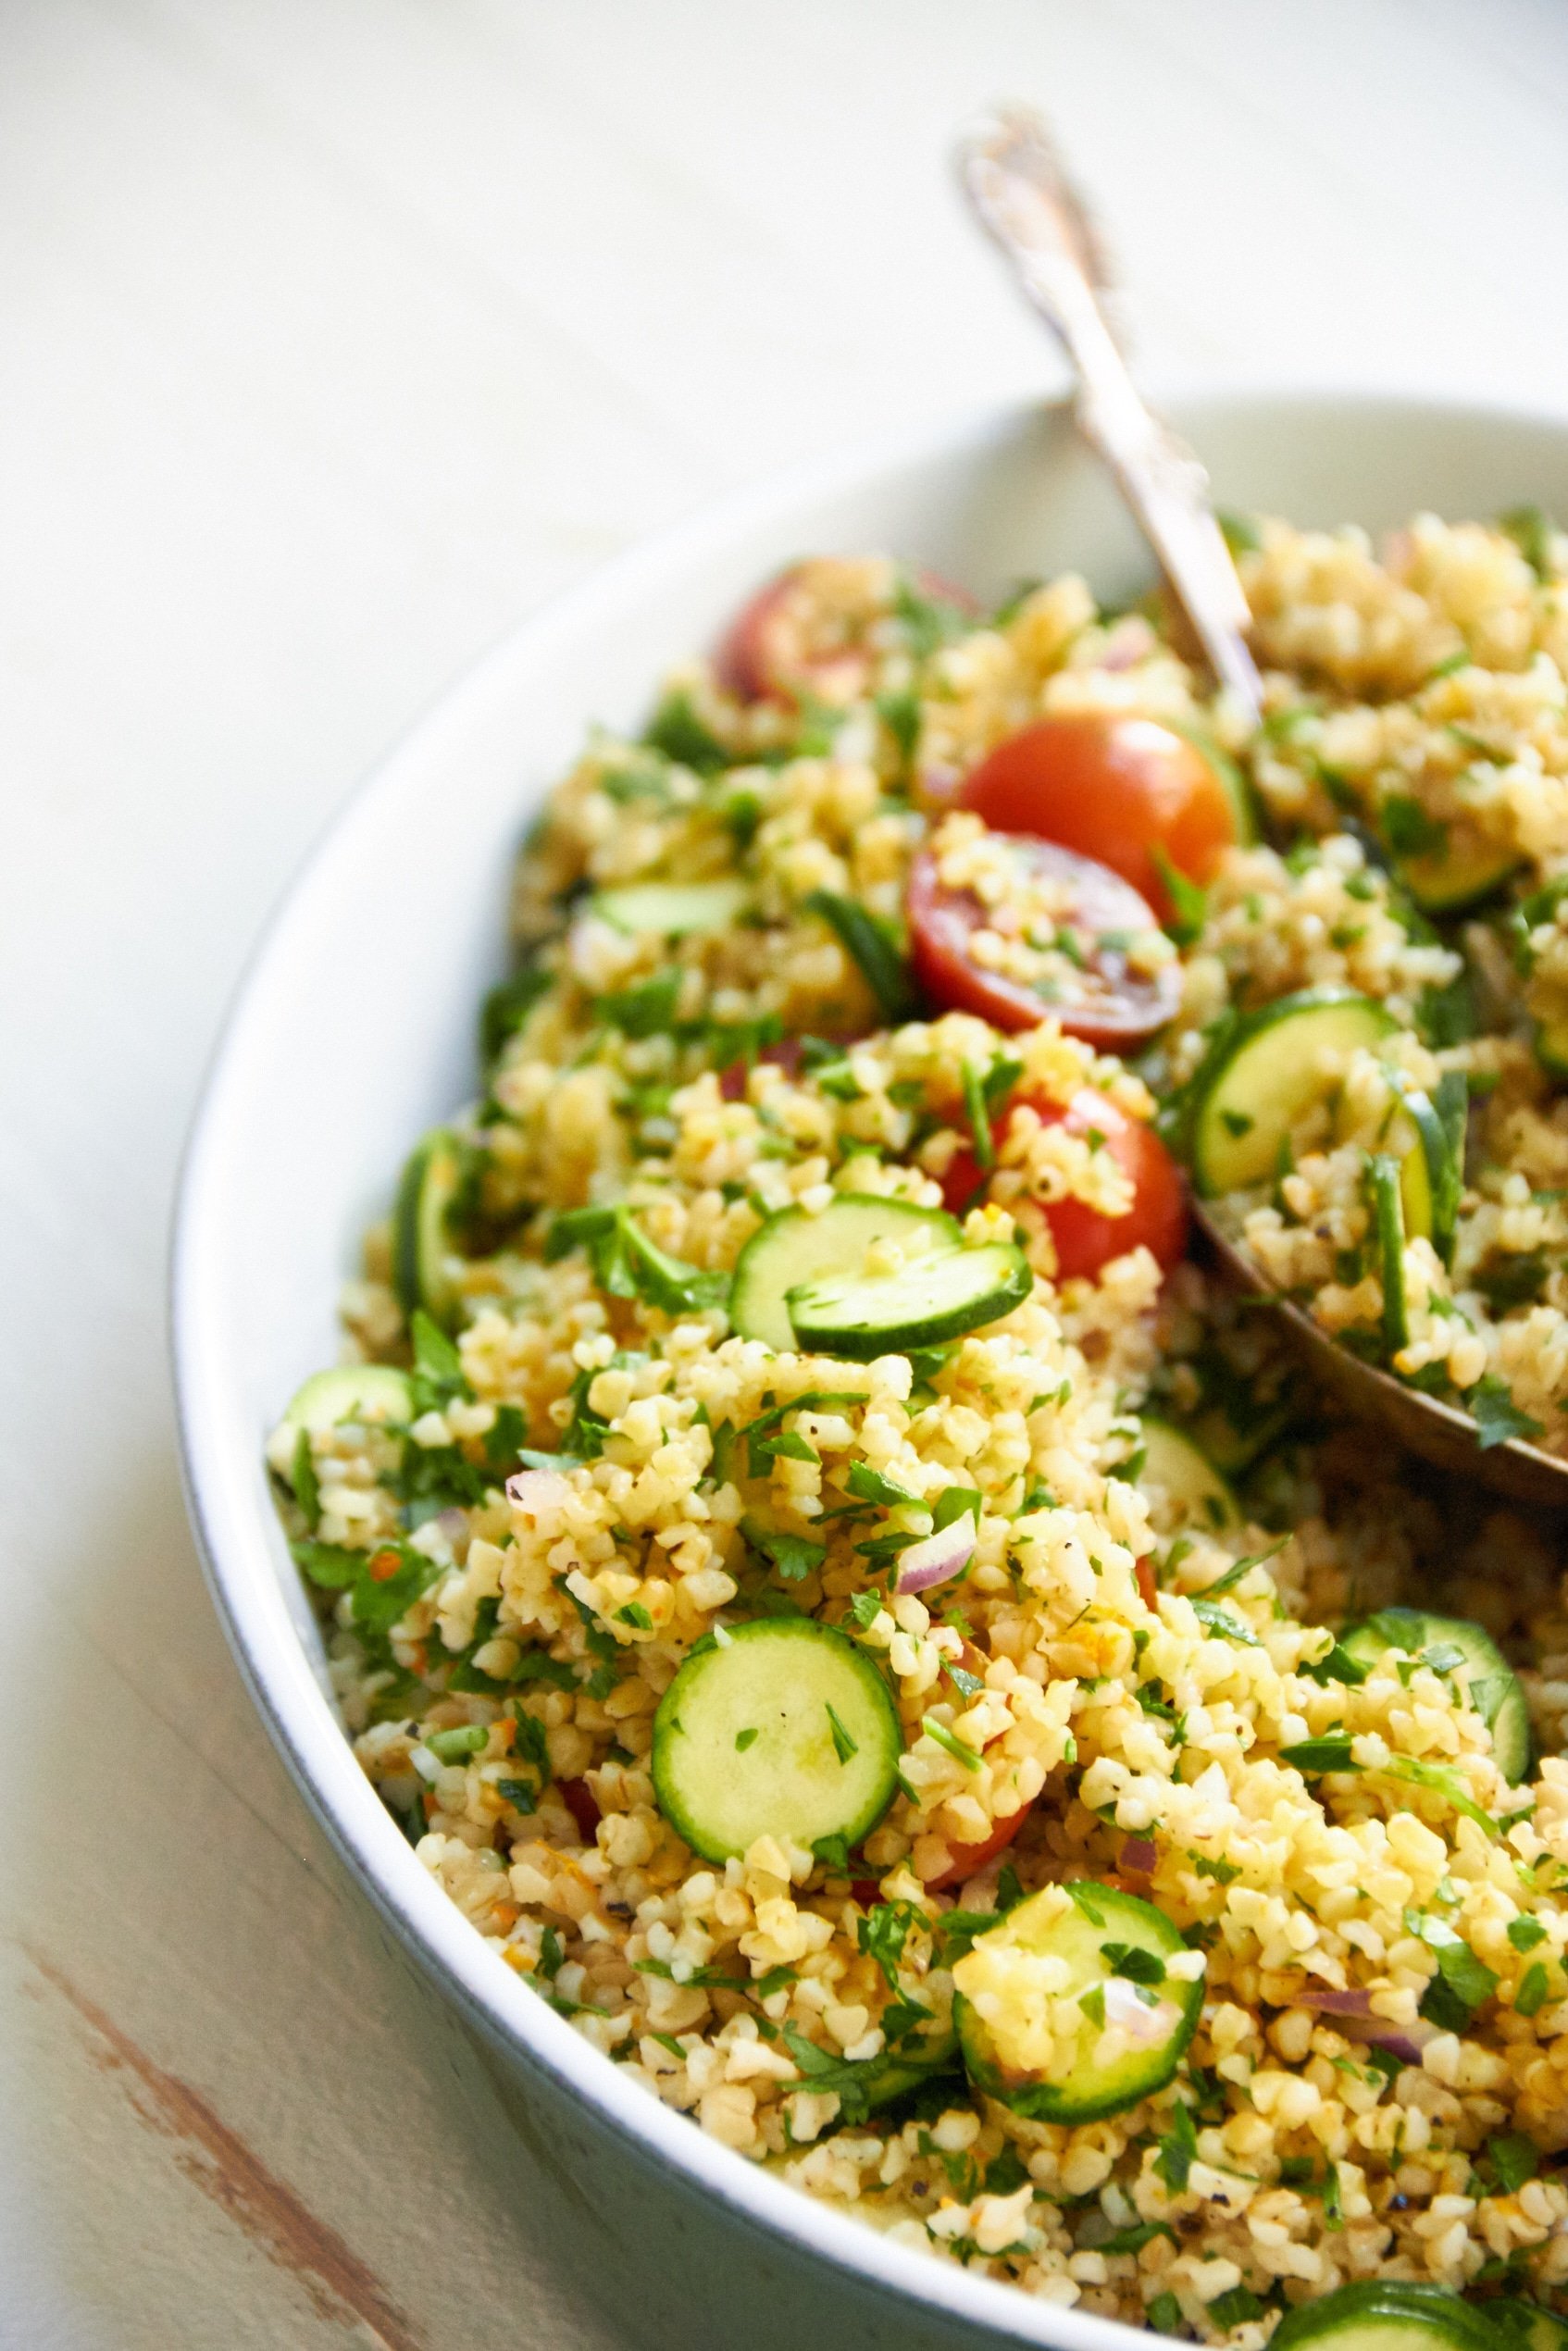 Serving bowl and spoon with Tomato, Zucchini and Bulgur Salad..